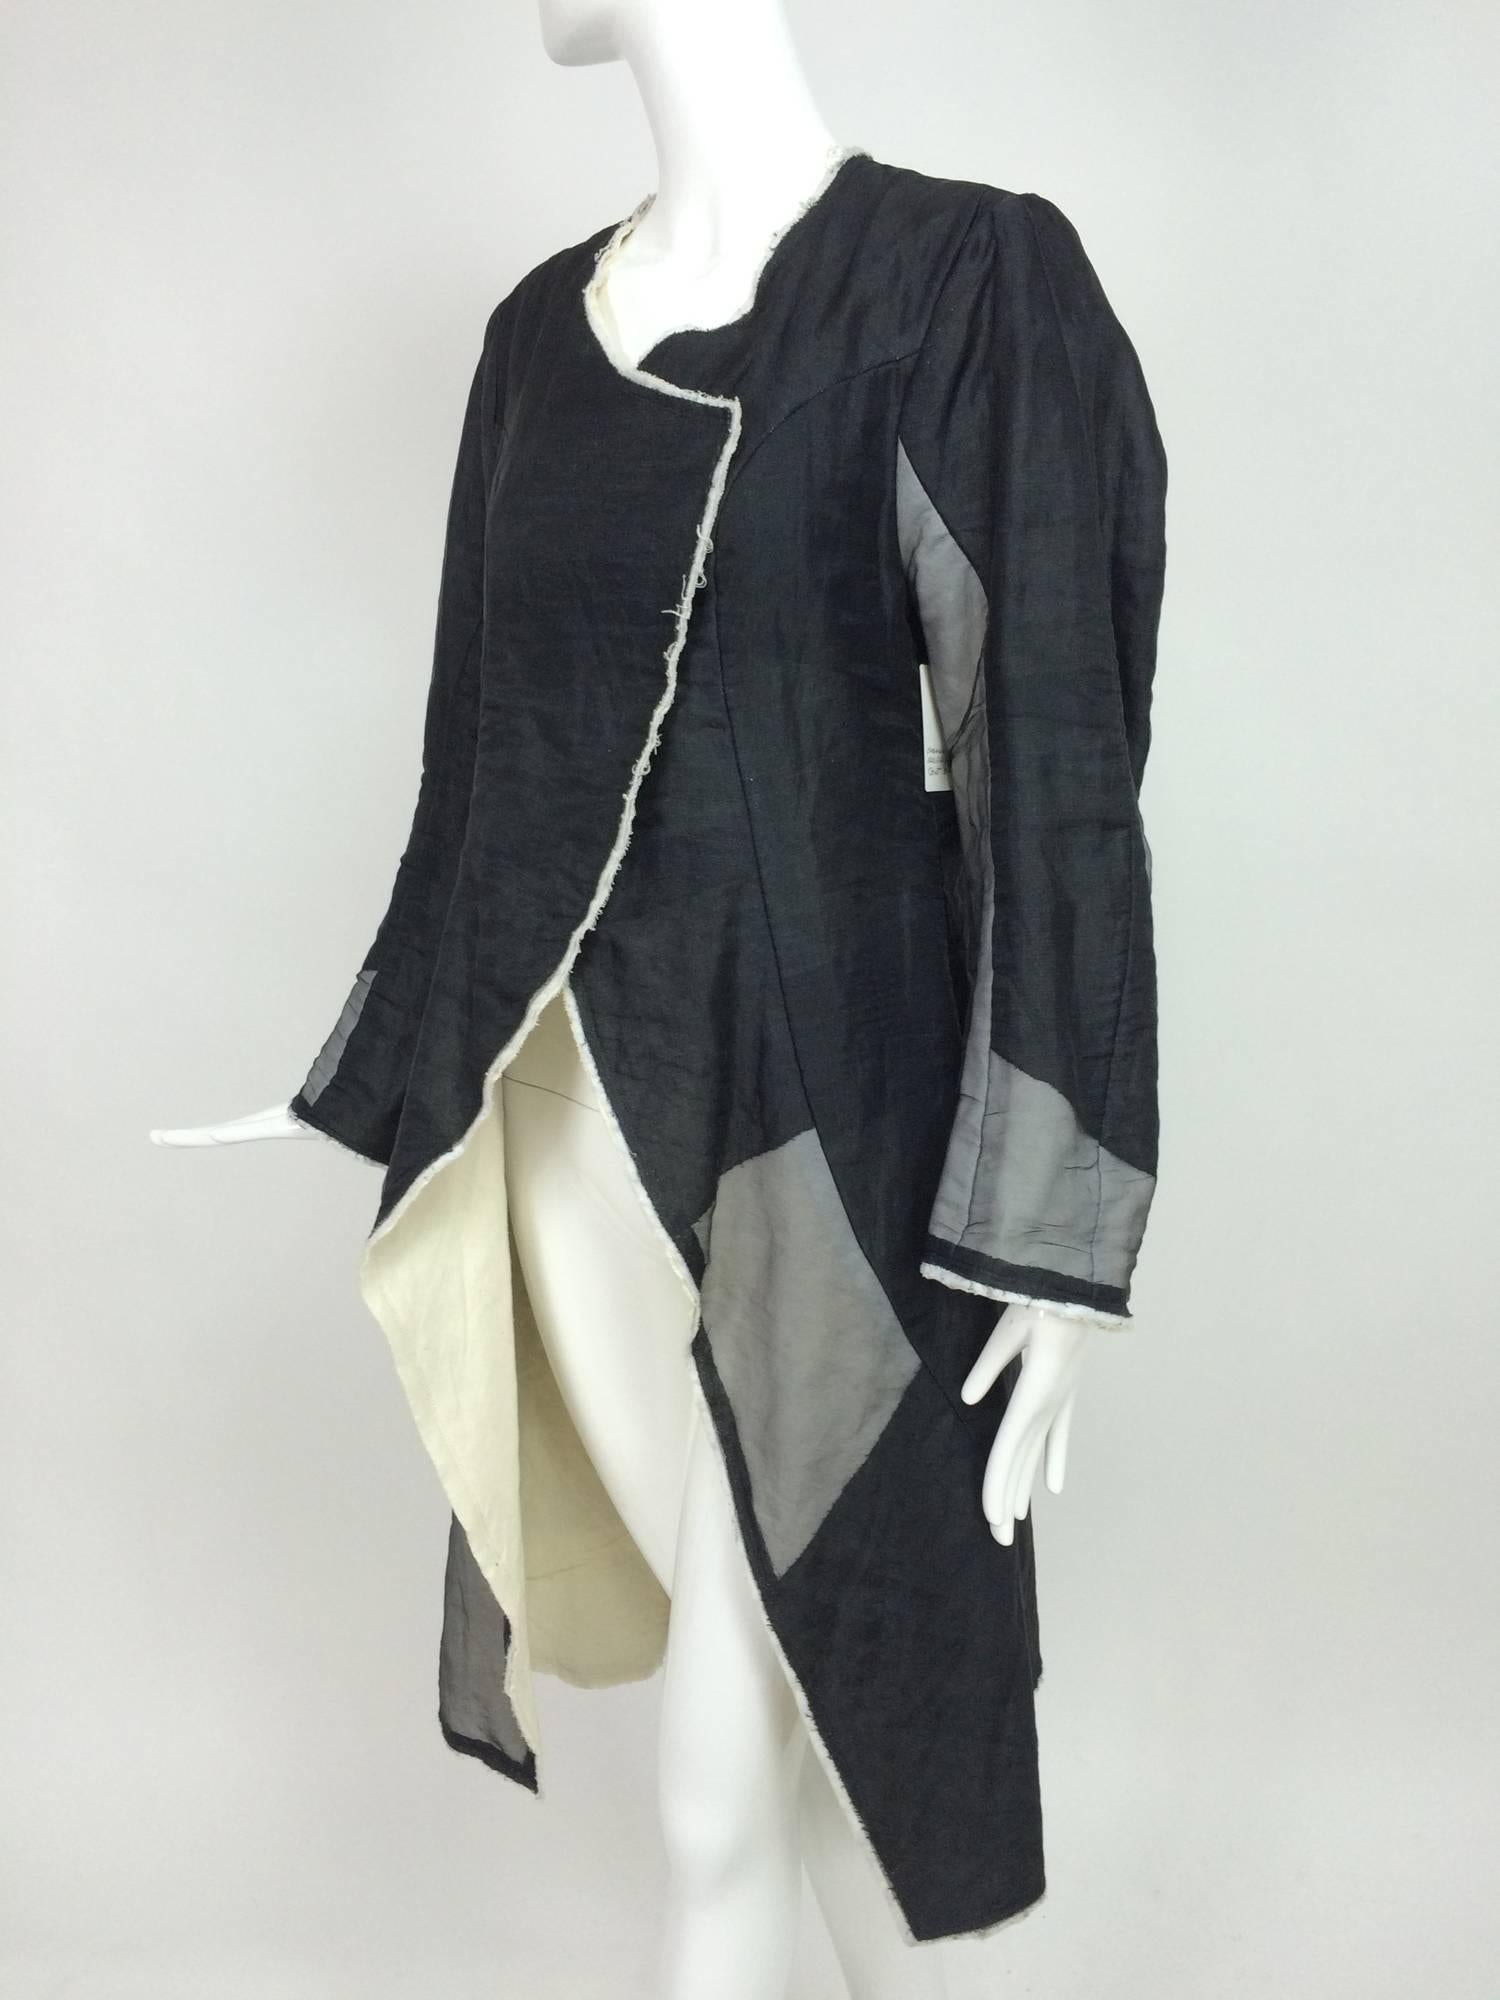 Nobu Nakano Japan black and grey patch sparkle organza and muslin cutaway Coat...Art to wear, open front coat with cross over upper front, that closes with snaps, the coat is cutaway at the hip to the hem...Long tapered sleeves...The body of the